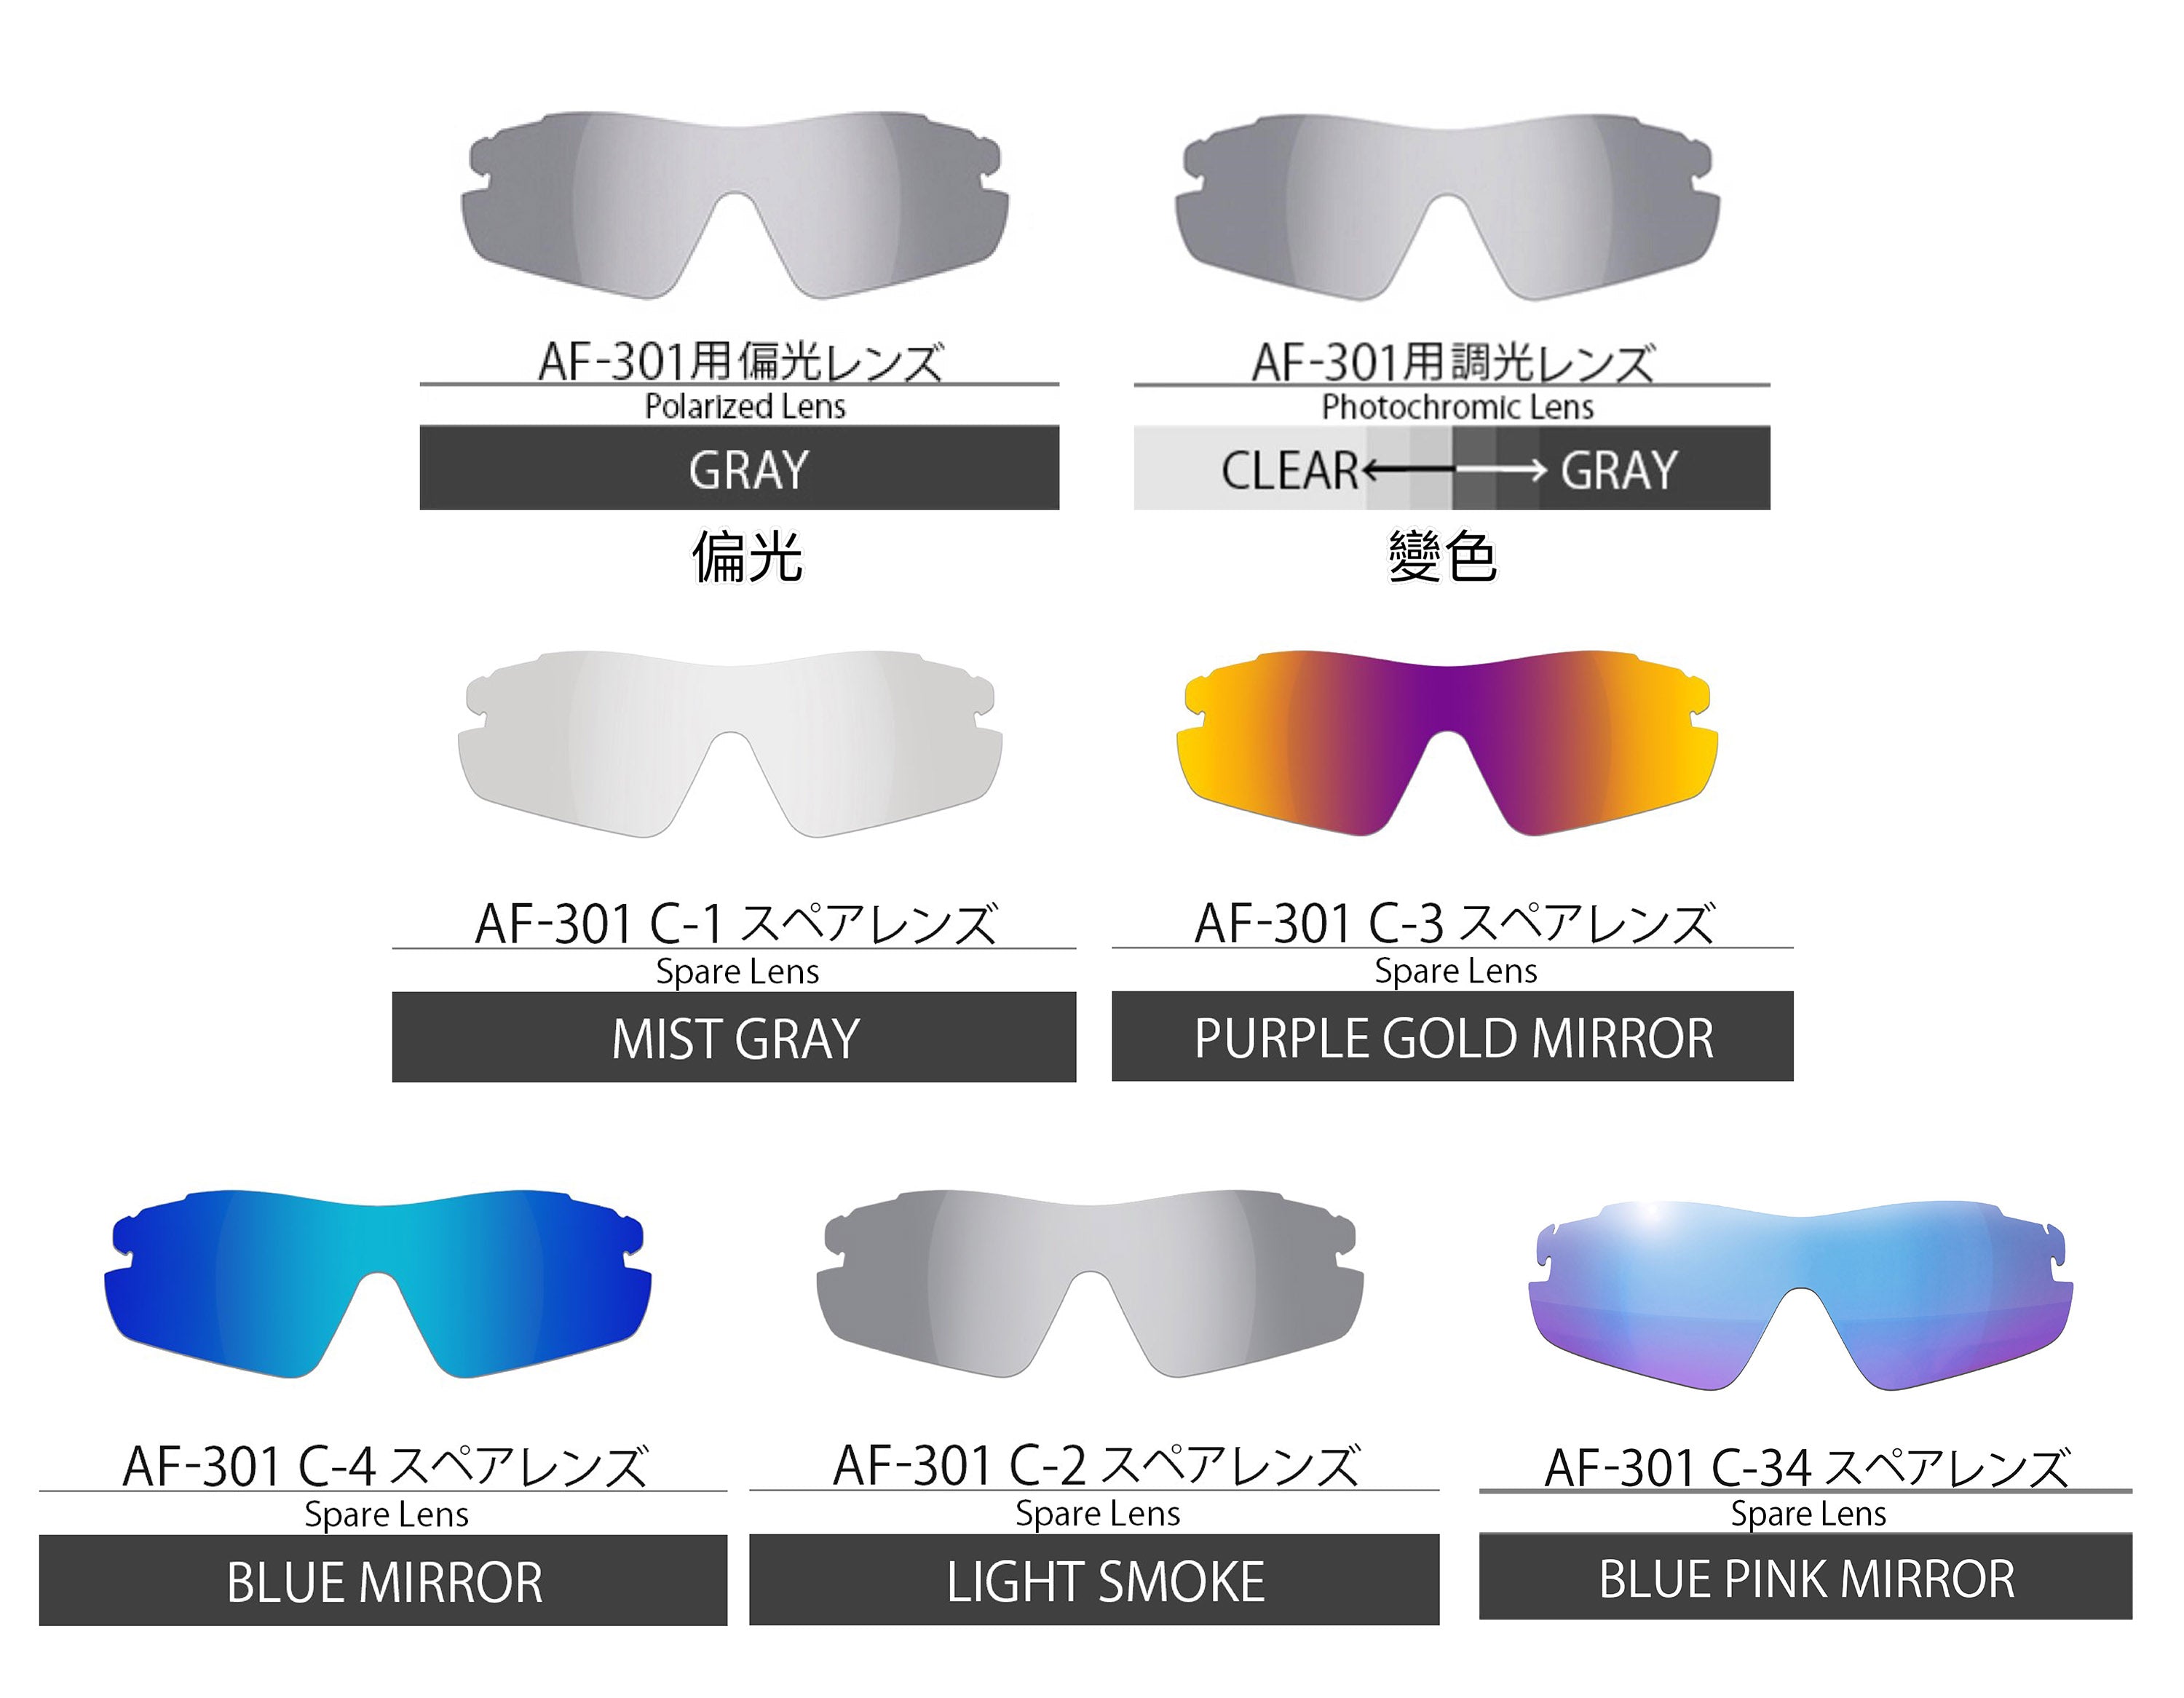 AirFly - AF301 C3 (Purple Gold Mirror Lens)【Pre-order Now】